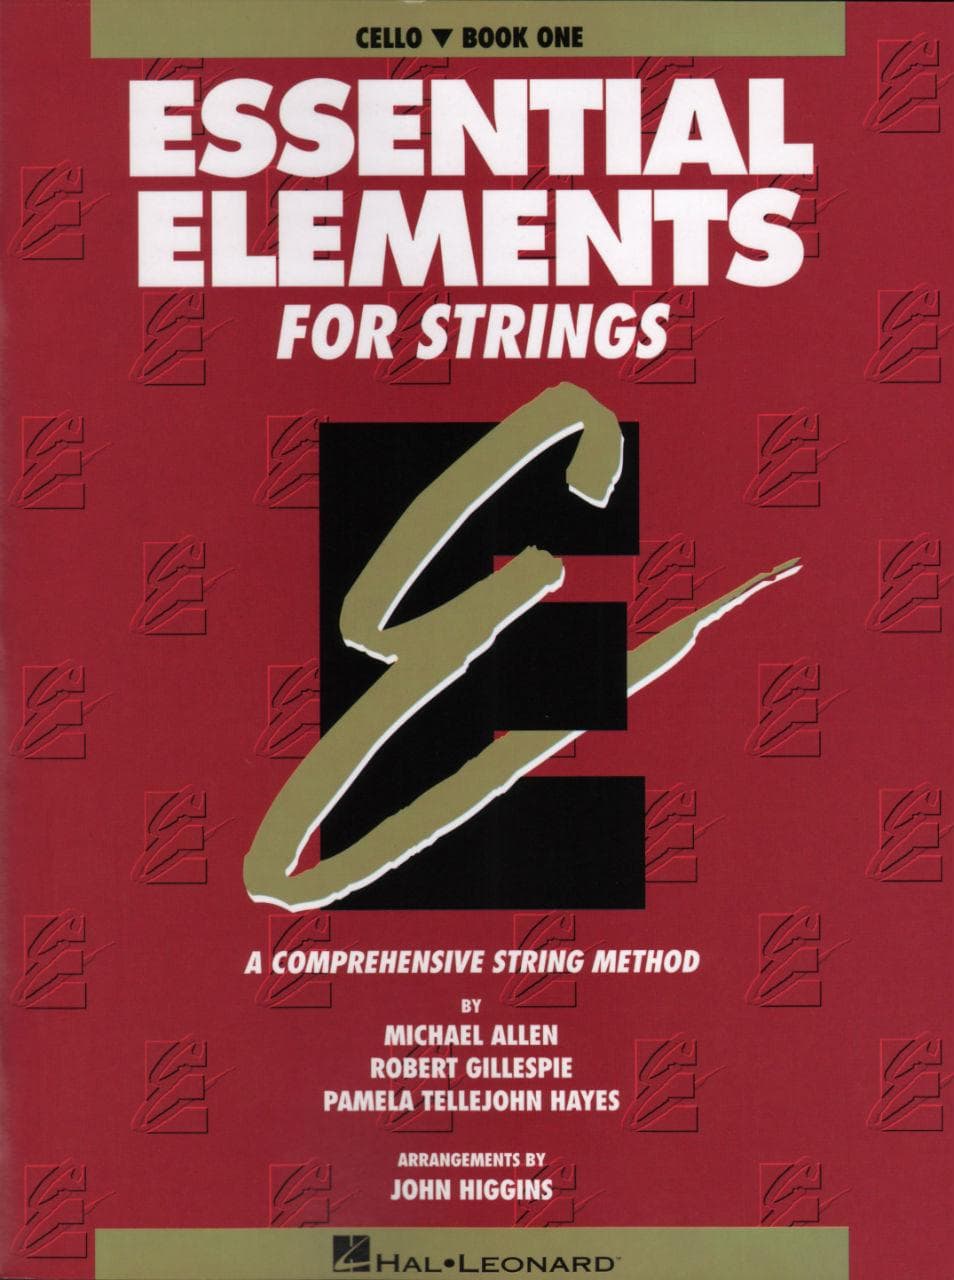 Essential Elements for Strings, Book 1 - Cello - by Allen/Gillespie/Hayes - Hal Leonard Publication